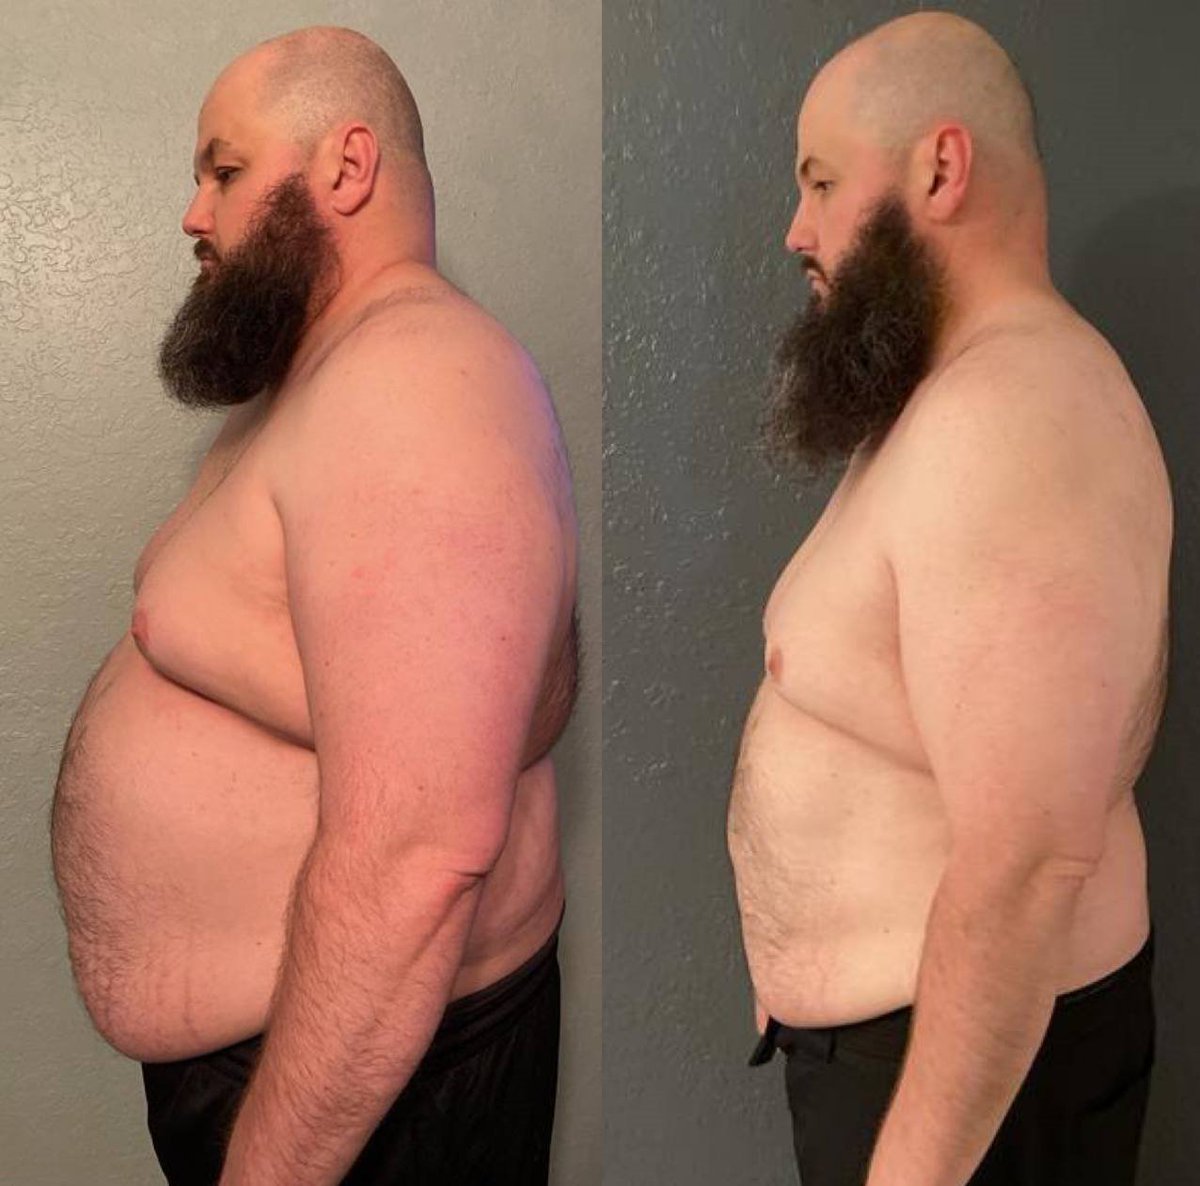 Adam has lost 80lbs so far WITHOUT going to the gym

- Been overweight his entire life

- Super hectic job (manages 20 employees)

- Didn’t believe sustainably losing weight was even possible for him.